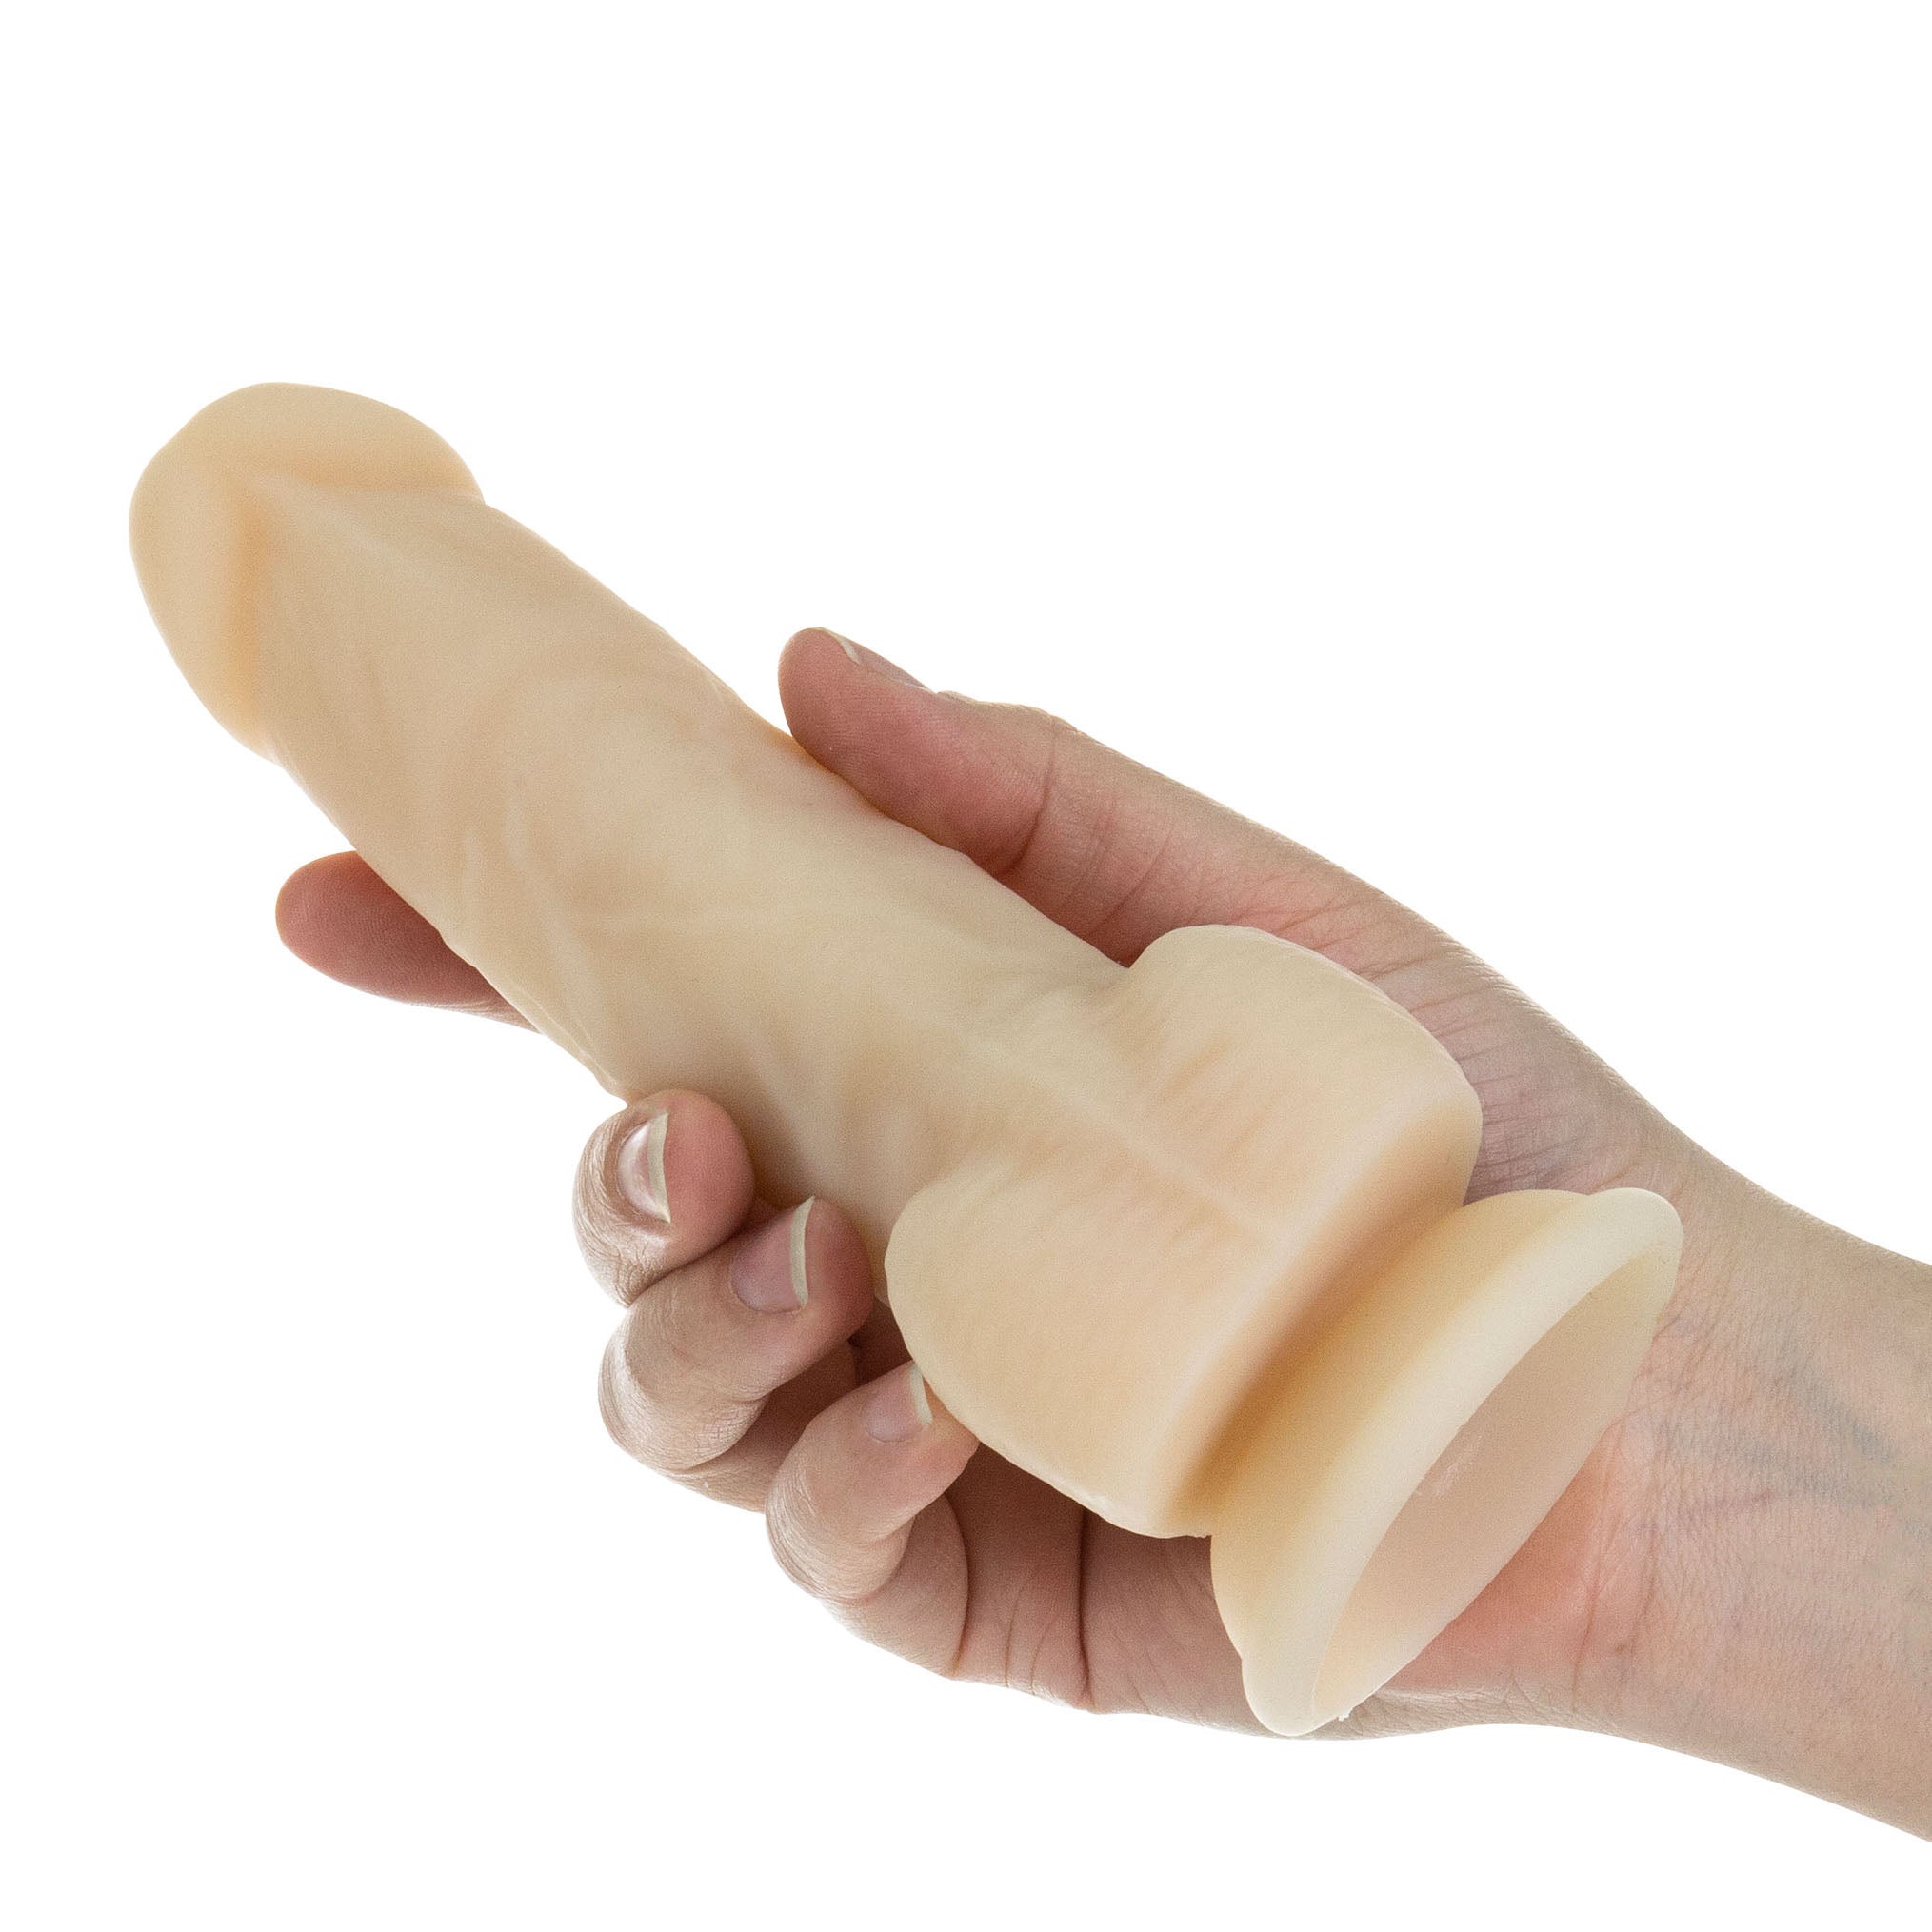 Naked Addiction 7 Inch Rotating and Vibrating Dong > Realistic Dildos and Vibes > Realistic Vibrators 7 Inches, Female, NEWLY-IMPORTED, Realistic Vibrators, Silicone - So Luxe Lingerie